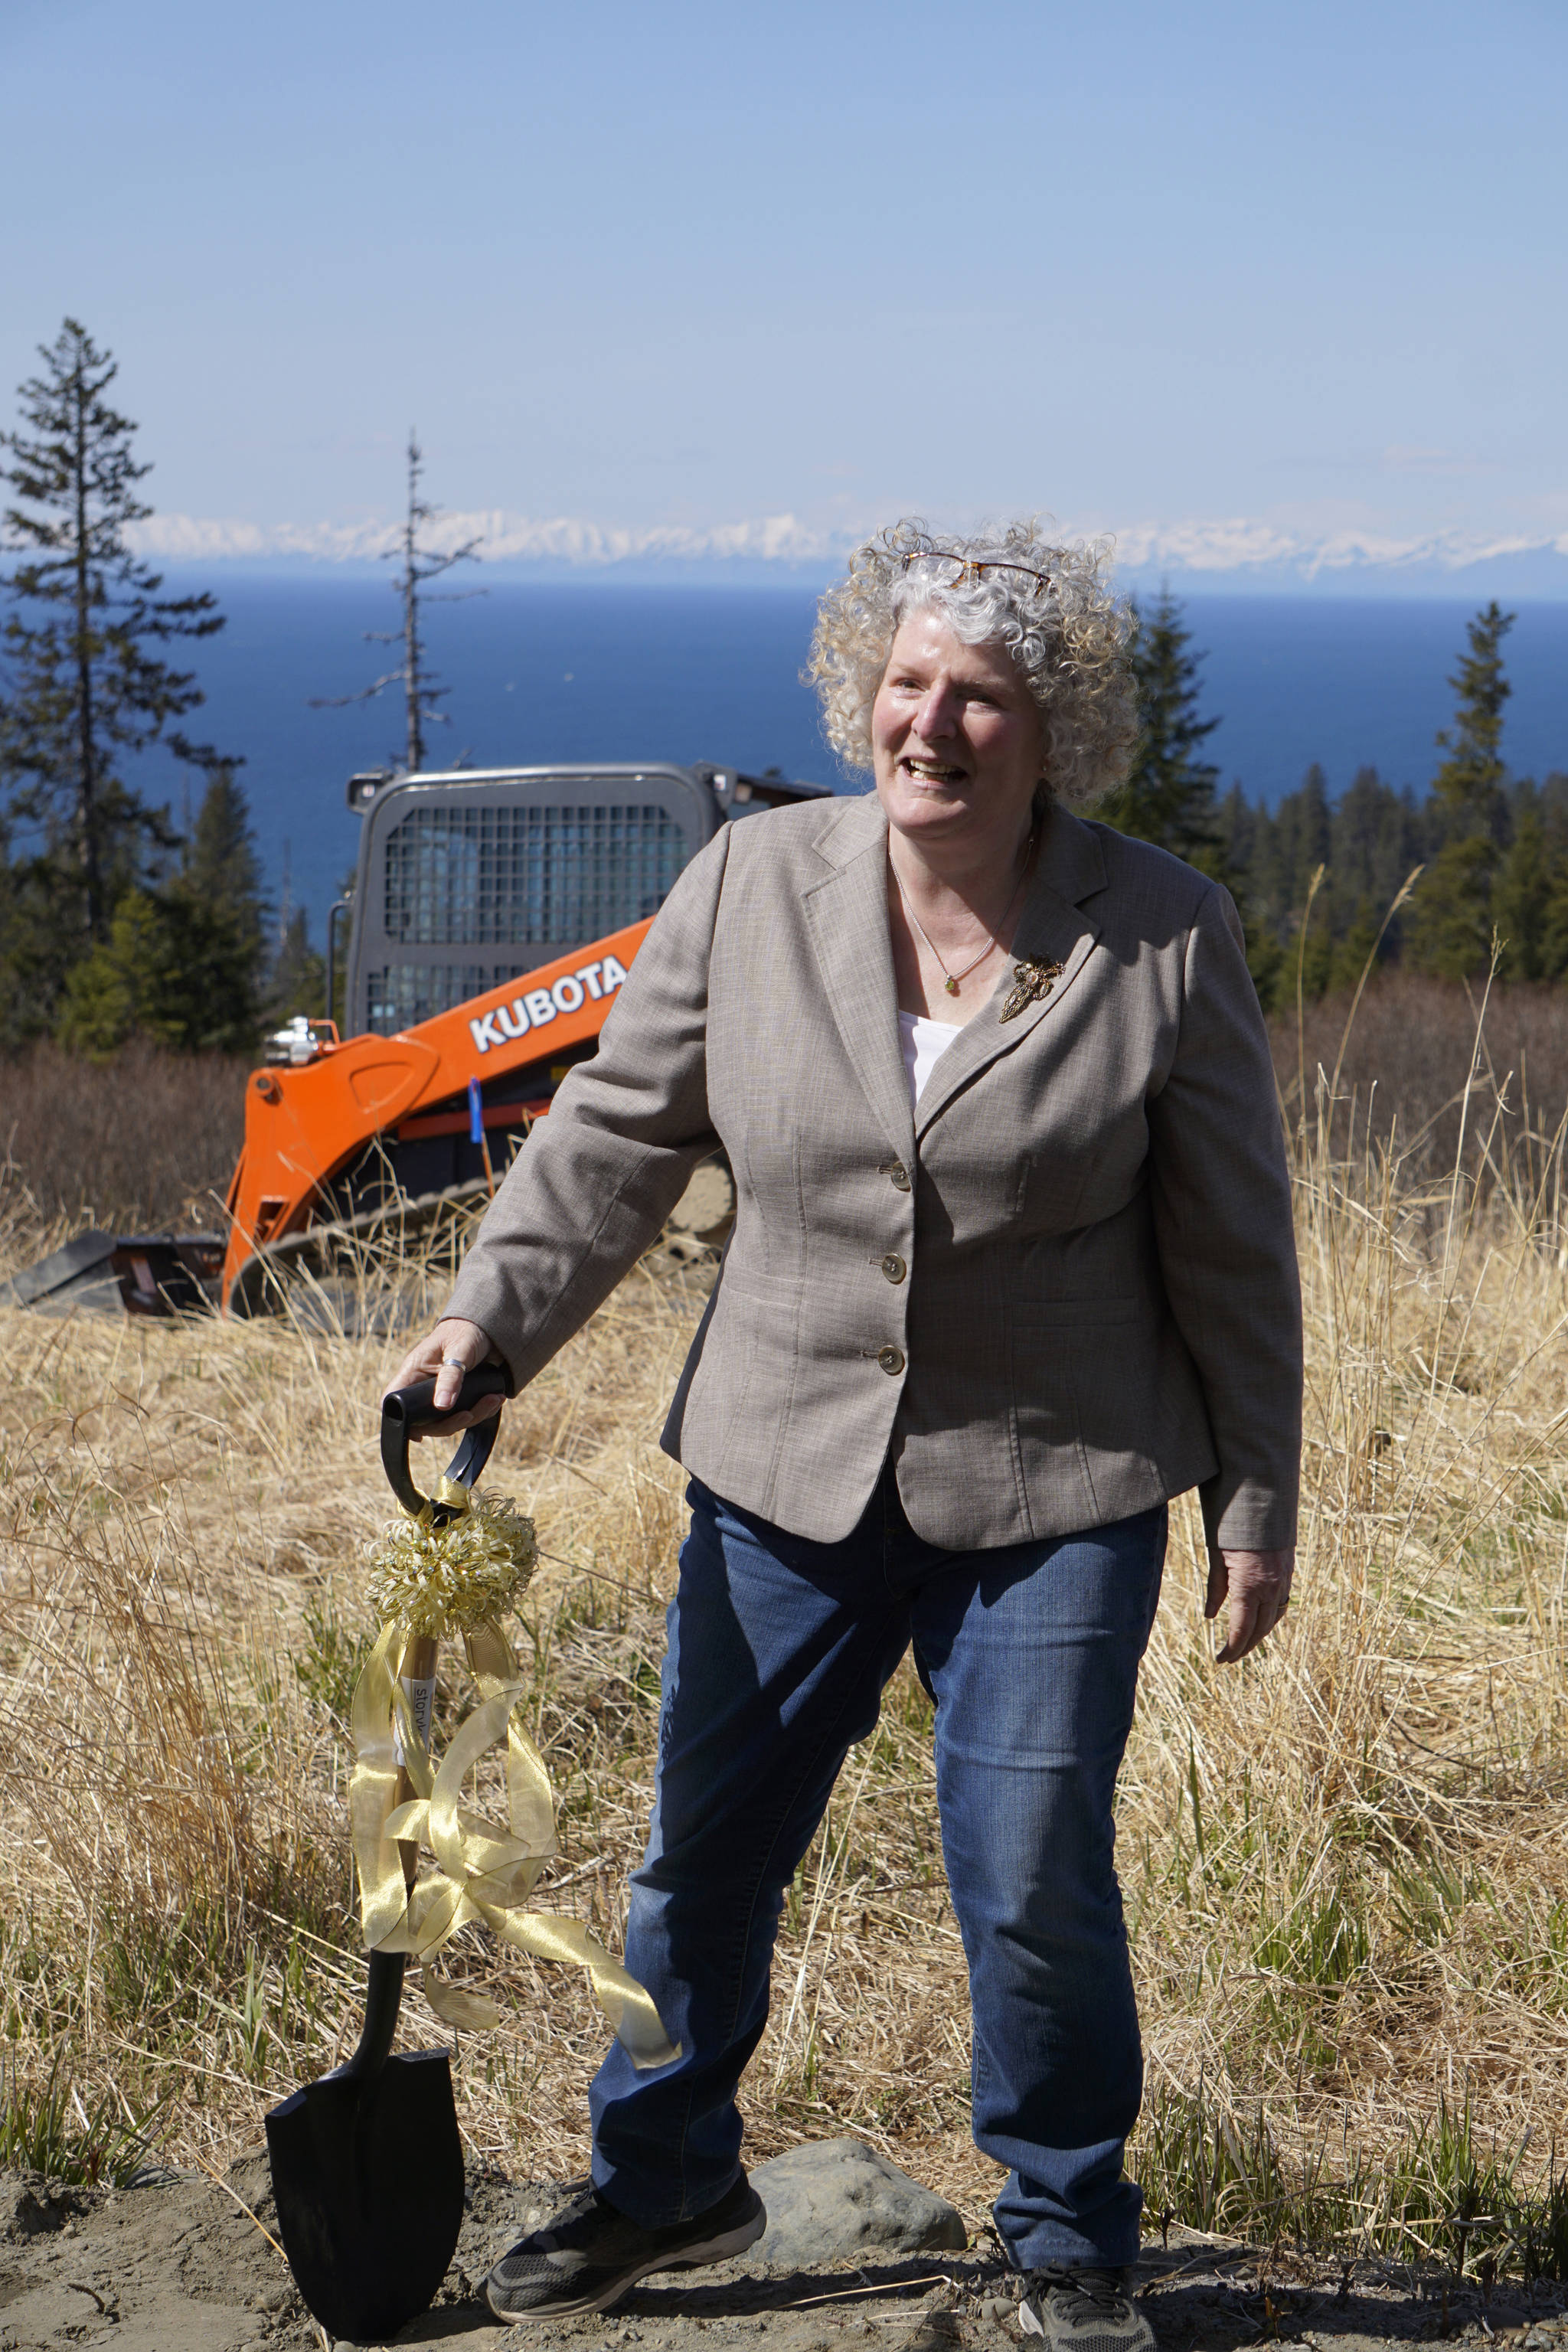 Building a dream Homer writer and Storyknife Writers Retreat founder Dana Stabenow turns the earth at groundbreaking ceremonies last Saturday, May 4, 2019, at the retreat property in Homer, Alaska. Construction started this month on the main house and cabins that will in a year house visiting women writers. (Photo by Michael Armstrong/Homer News)